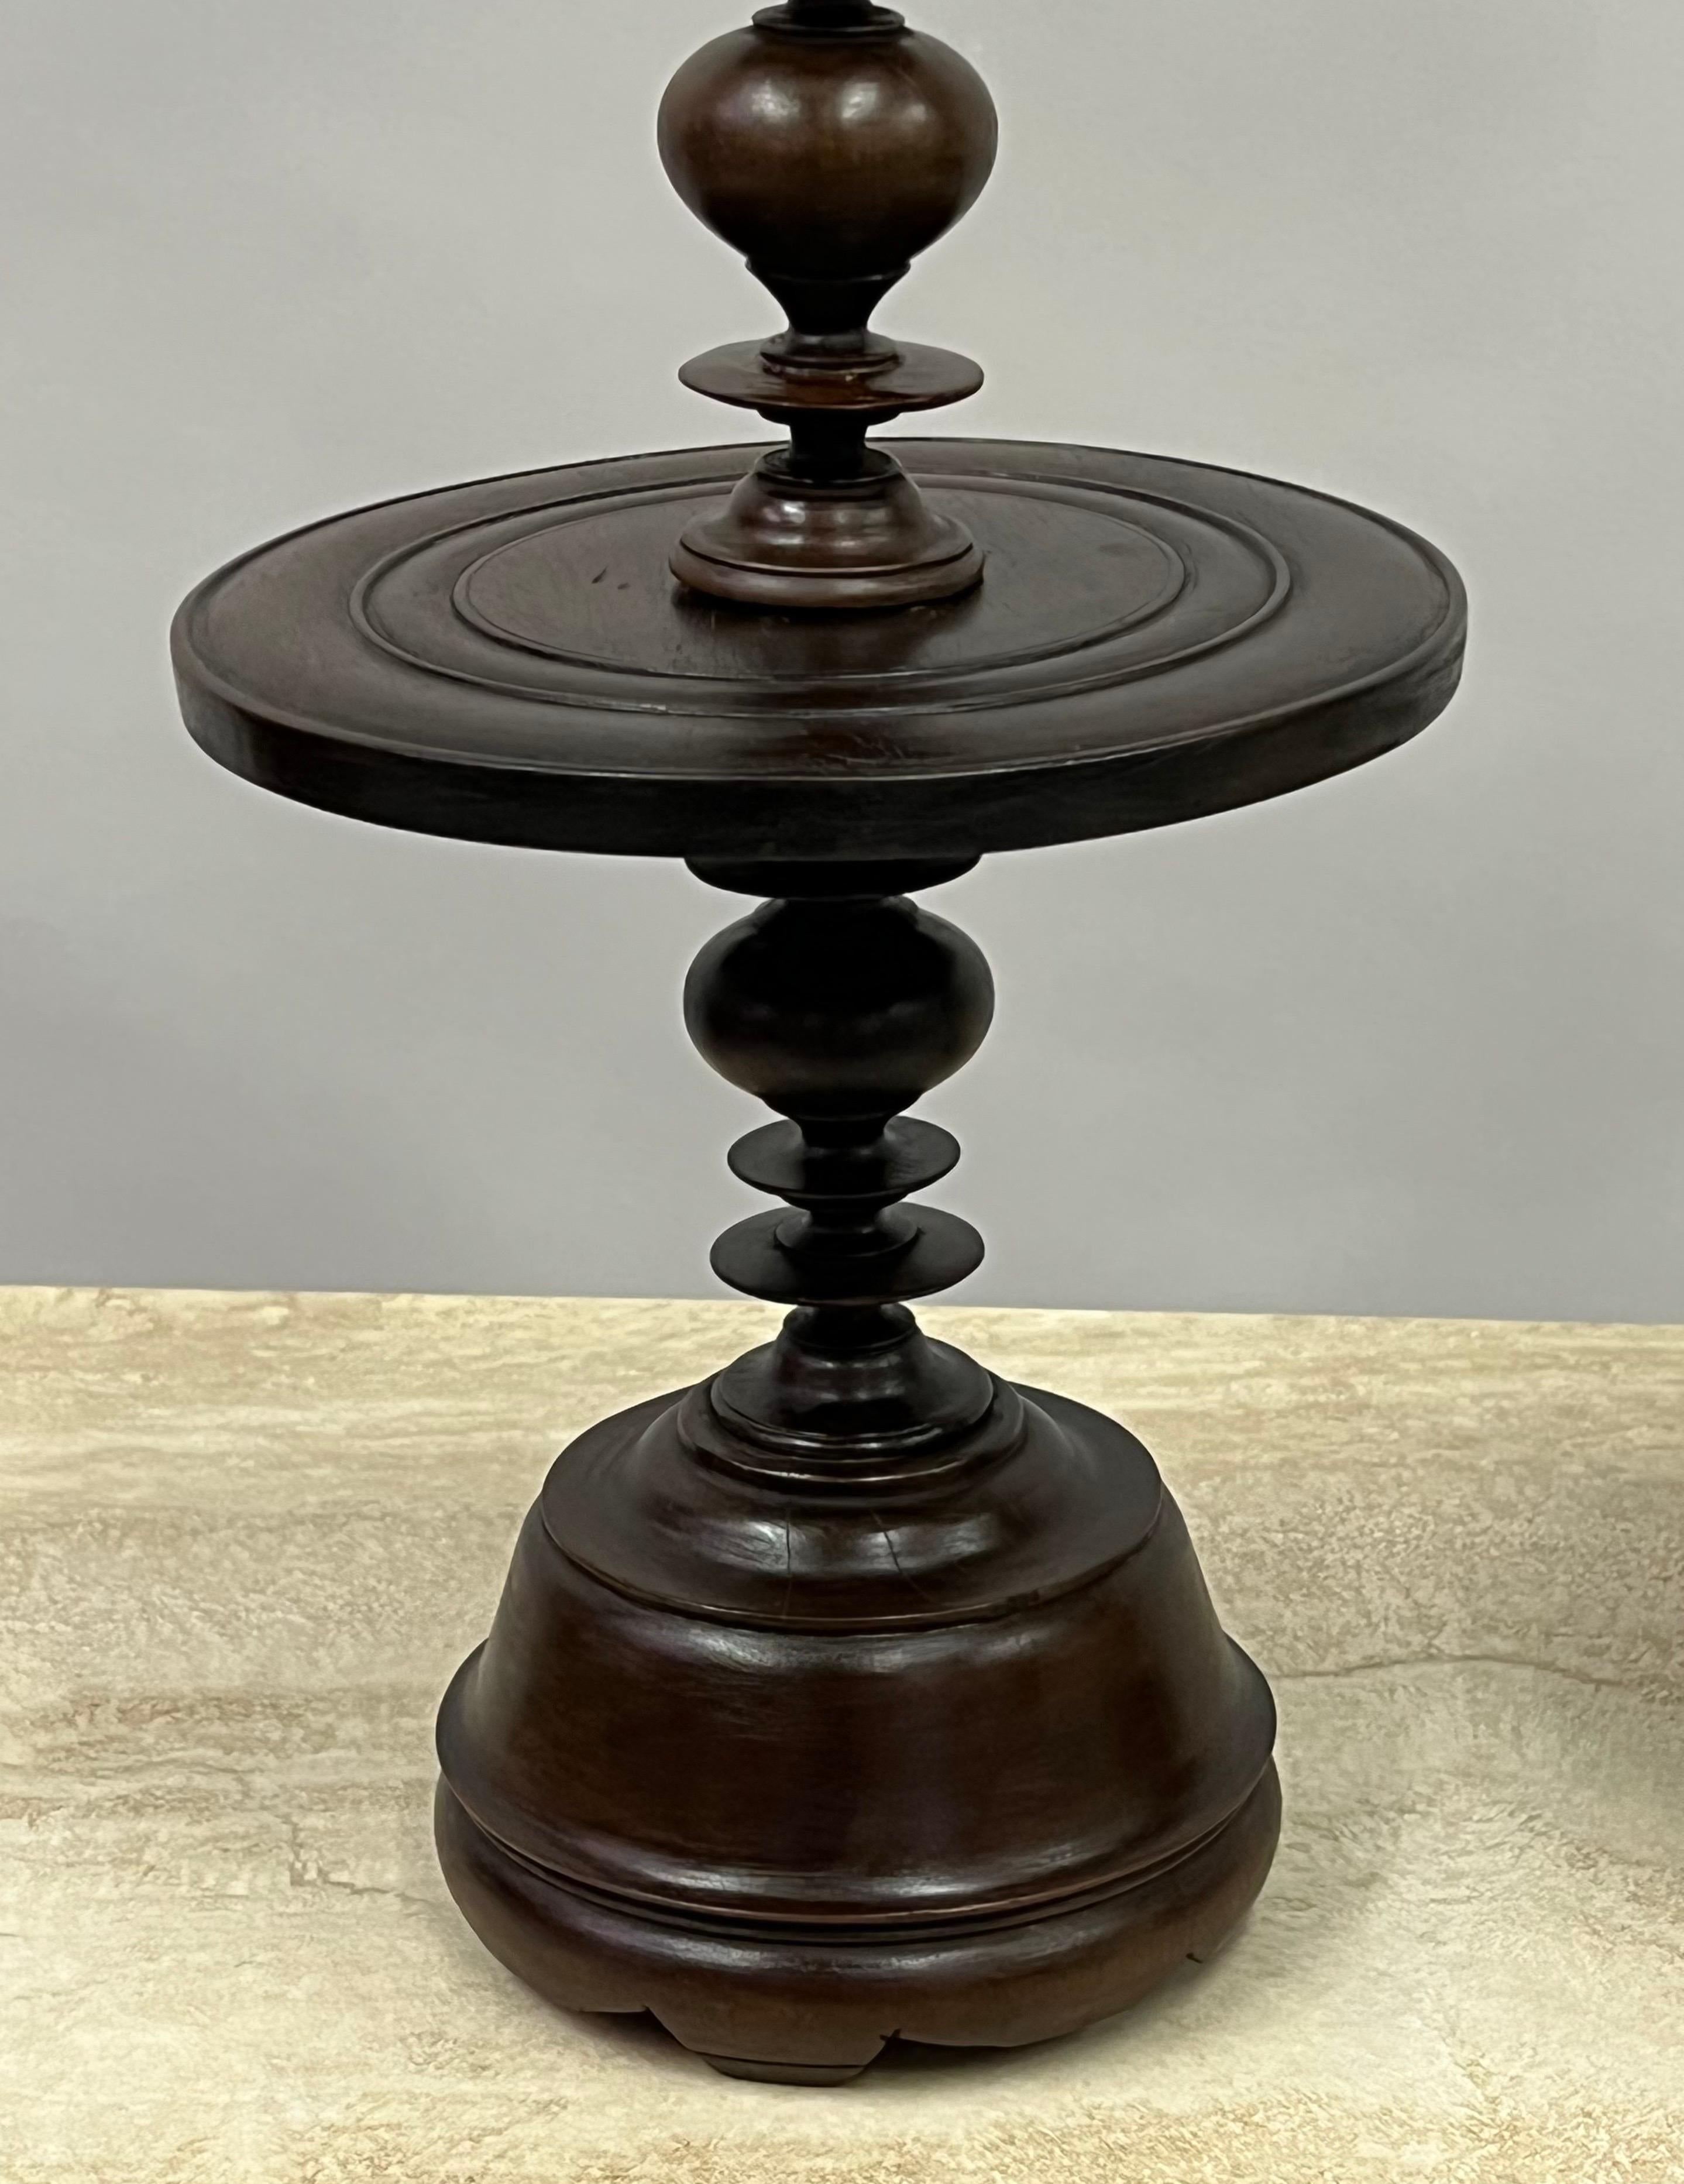 Pair of French Colonial Carved Teak Wood Table Lamp Bases or Candelabras c. 1930 For Sale 1